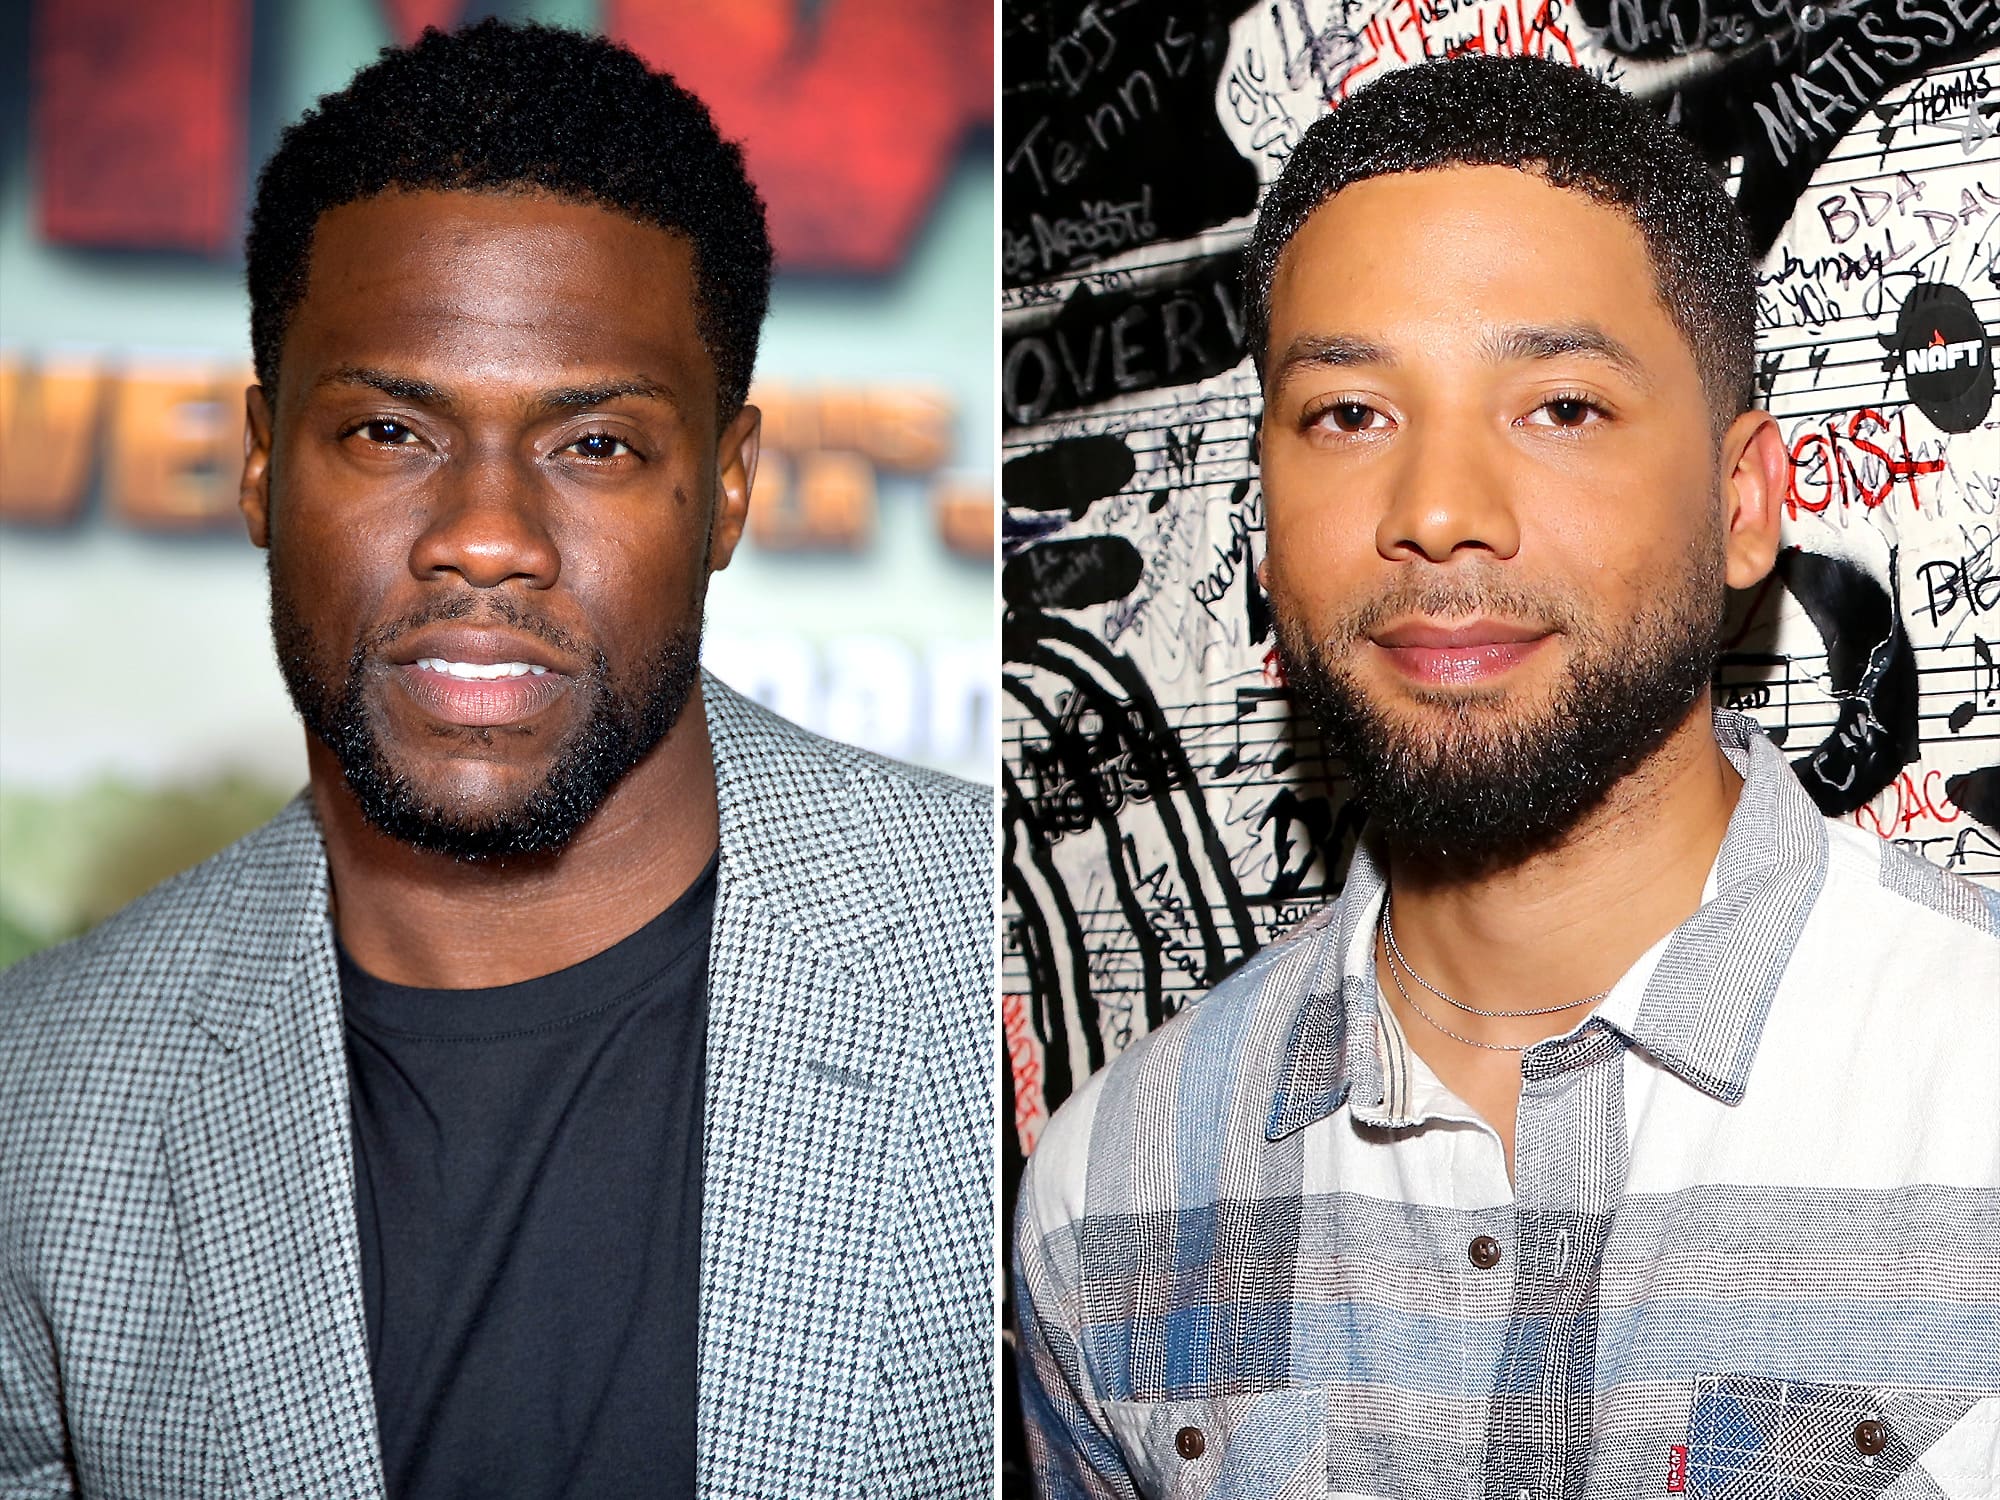 ”kevin-hart-responds-to-criticism-after-he-shows-support-to-jussie-smollett-despite-his-homophobic-tweets-scandal”